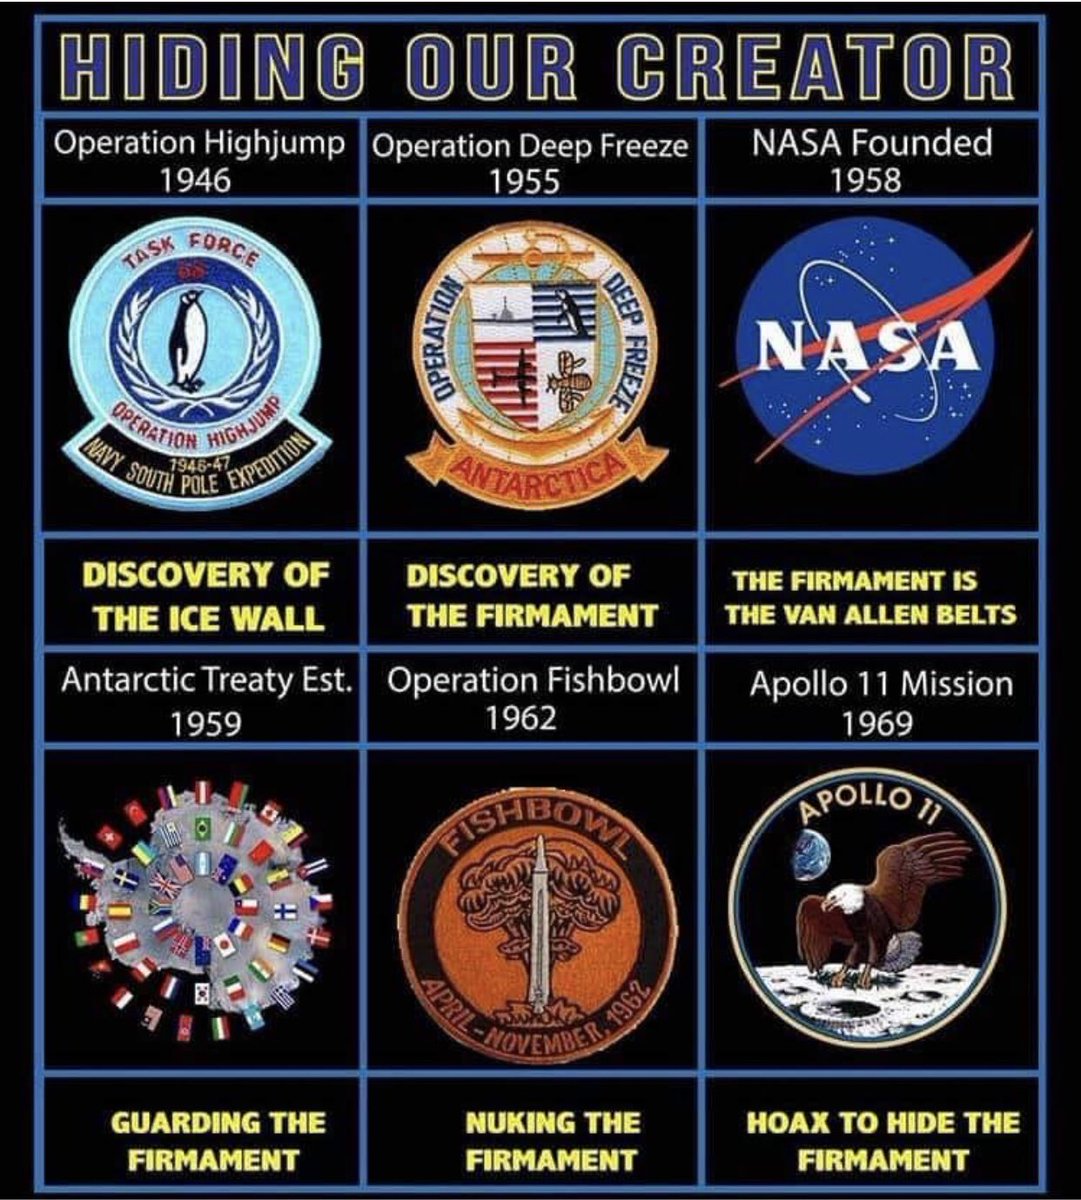 If You Havent Looked Into It Already, I Highly Recommend You DoWhat happened over a Course of 20 Years has Completely Shifted the Beliefs & Overall Mindset of All of HumanityThese Discoveries Led to Worldwide ManipulationHere Is A Thread Simplifying All Of It 